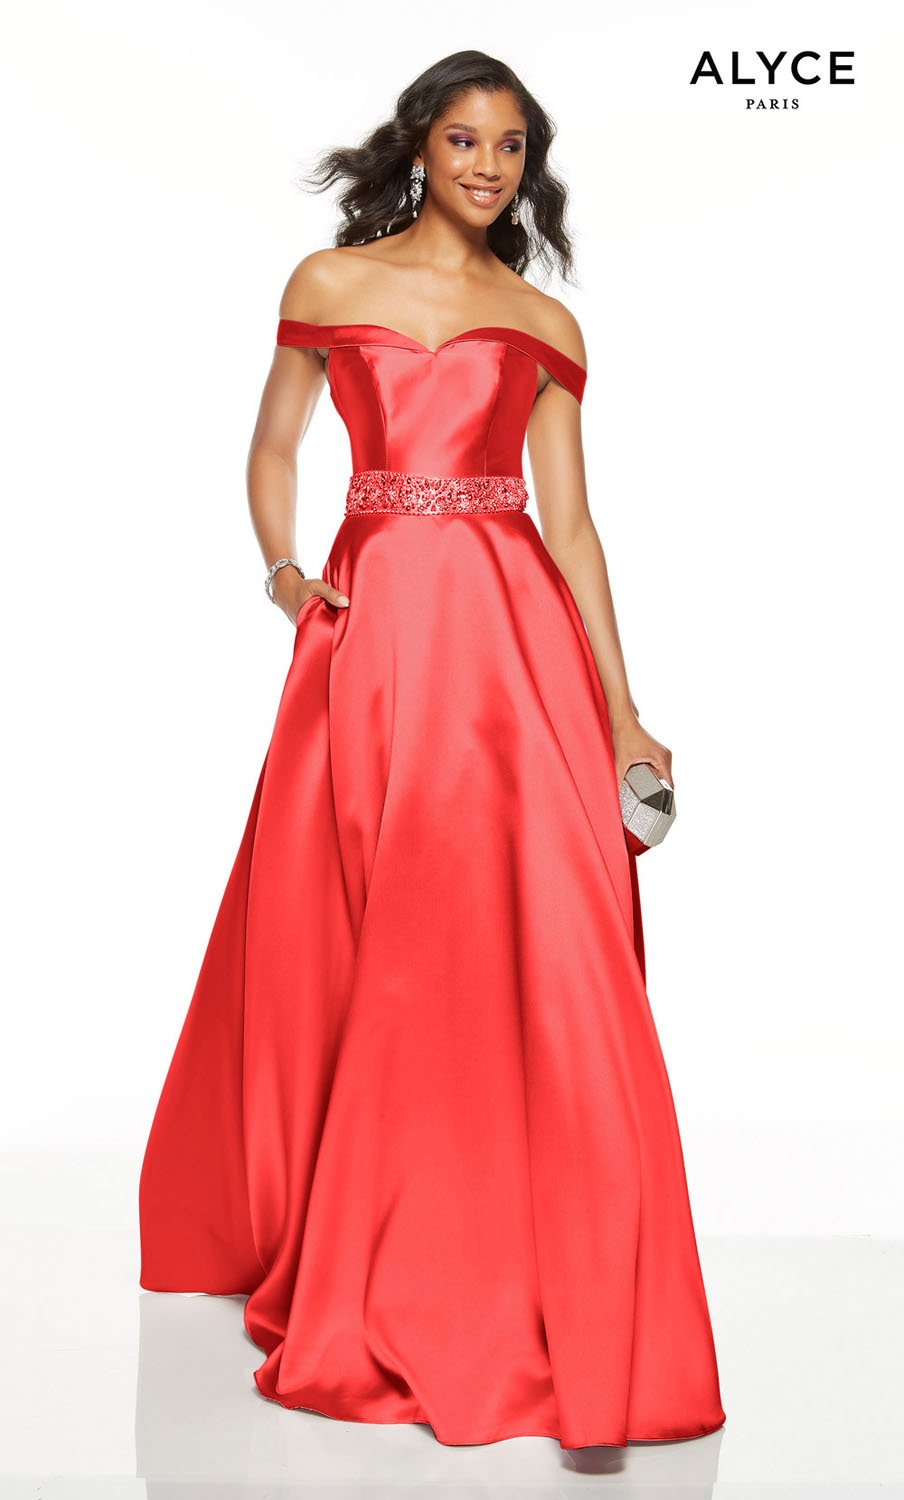 Alyce Paris 1502 dress images in these colors: Pink Alabaster, Sea Glass, Red, French Blue, Midnight.